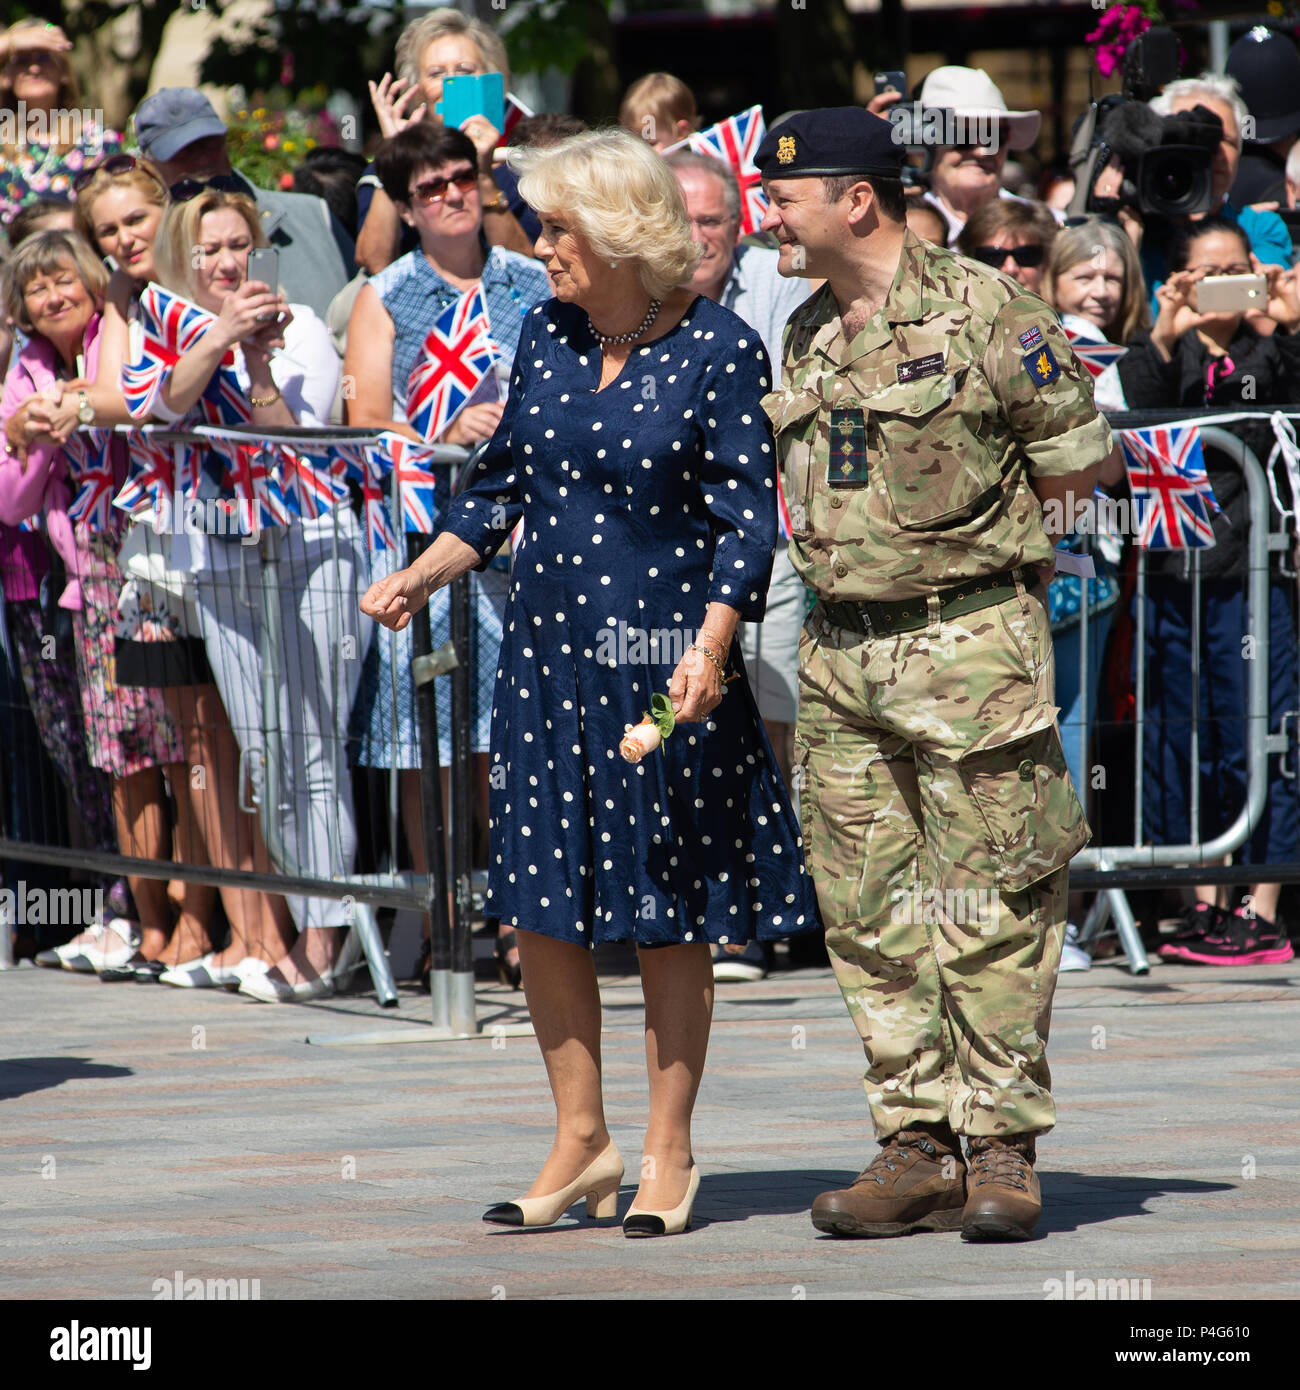 Salisbury, Wiltshire, UK, 22nd June 2018. Camilla, Duchess of Cornwall meeting the people in Market Square. The royal couple’s visit is to support the city’s recovery where visitor numbers have fallen and businesses suffered after the nerve agent attack in March 2018. Stock Photo